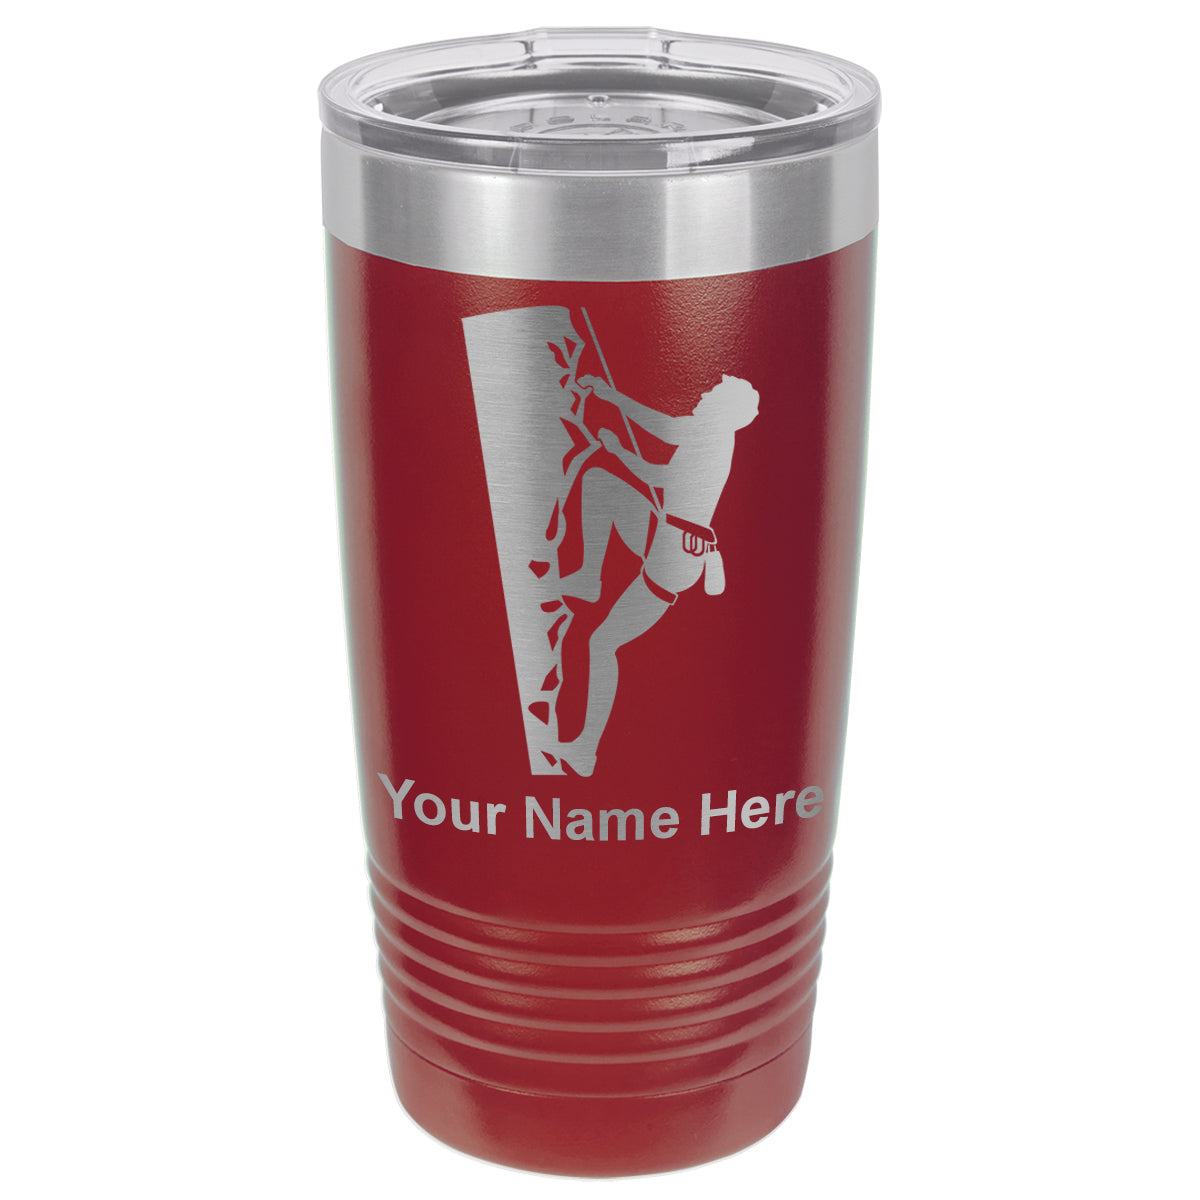 20oz Vacuum Insulated Tumbler Mug, Rock Climber, Personalized Engraving Included